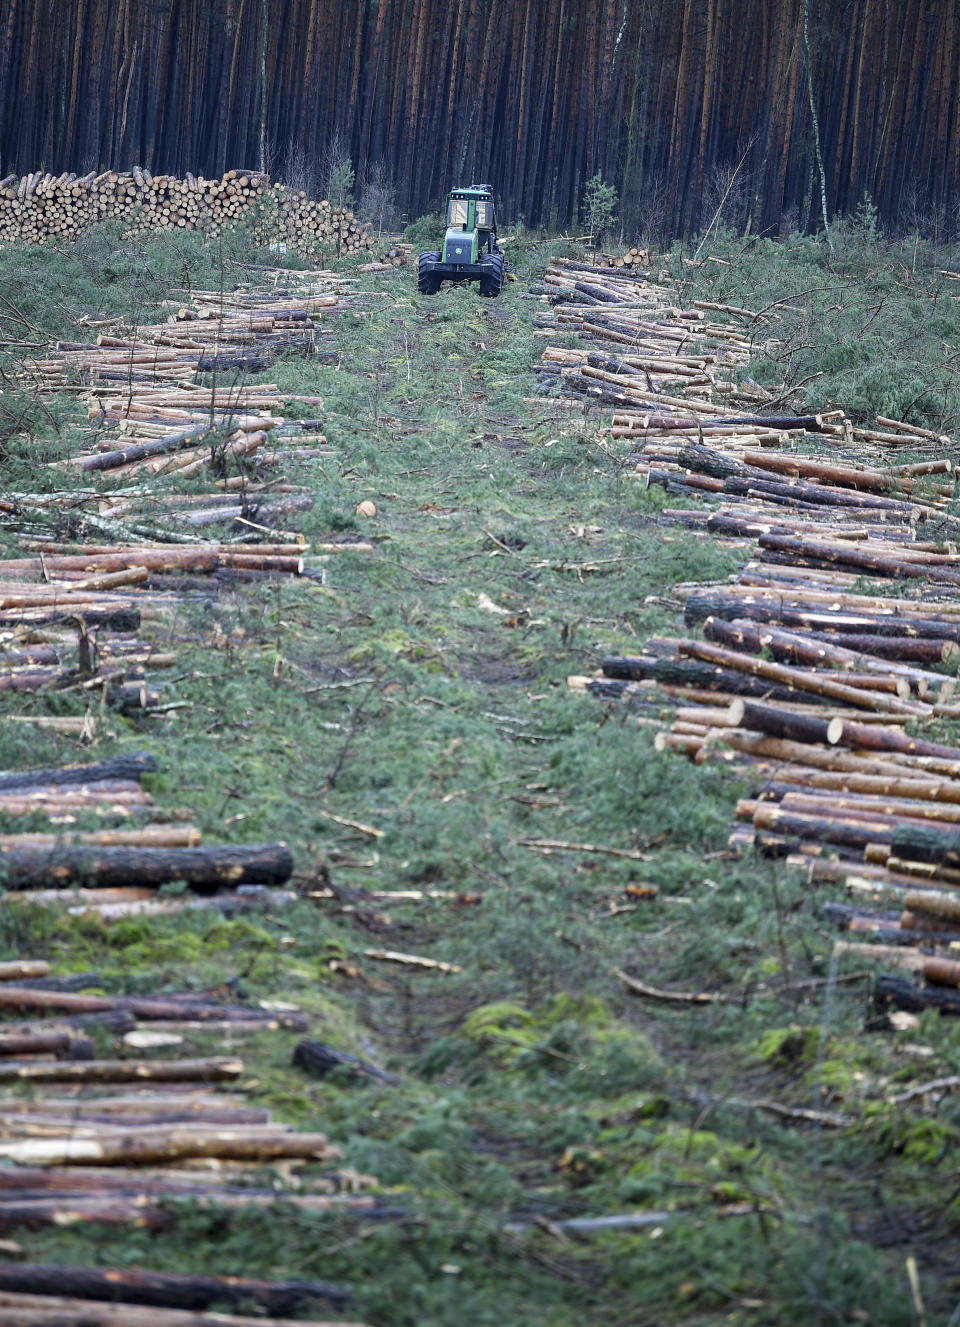 A grubbing machine stands on the site for the planned Tesla factory near Gruenheide, Germany, Sunday, Feb. 16, 2020. The Higher Administrative Court for Berlin-Brandenburg ordered Tesla to stop clearing trees on the wooded site near Berlin until it considers an environmental group's appeal. In a statement Sunday, the court said it had to issue the injunction because otherwise Tesla might have completed the work over the next three days. (Britta Pedersen/dpa via AP)